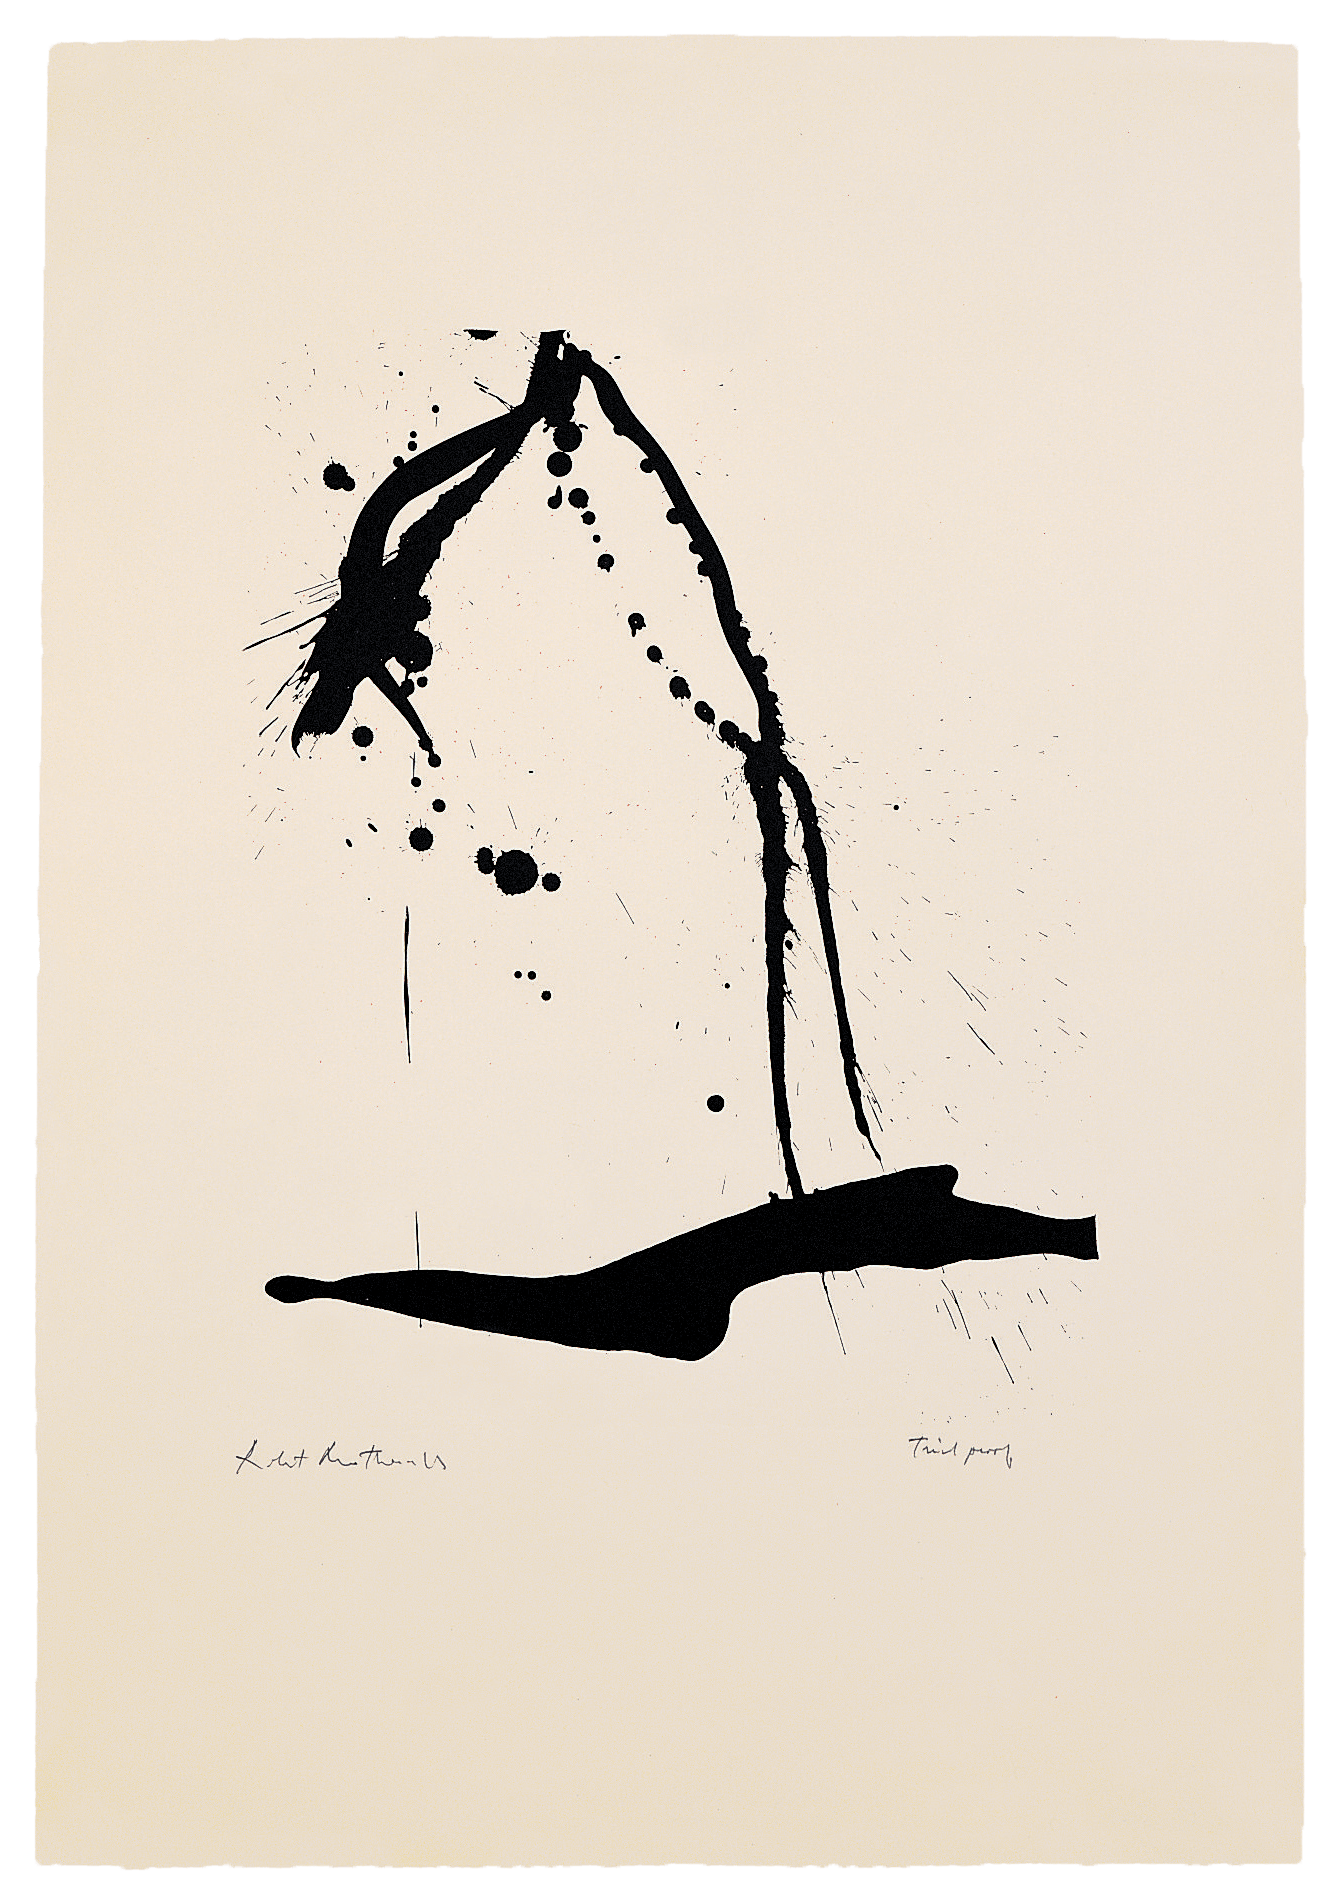 A Throw of the Dice No. 1, 1963. Lithograph on paper, 30 x 22 inches (76.2 x 55.9 cm)